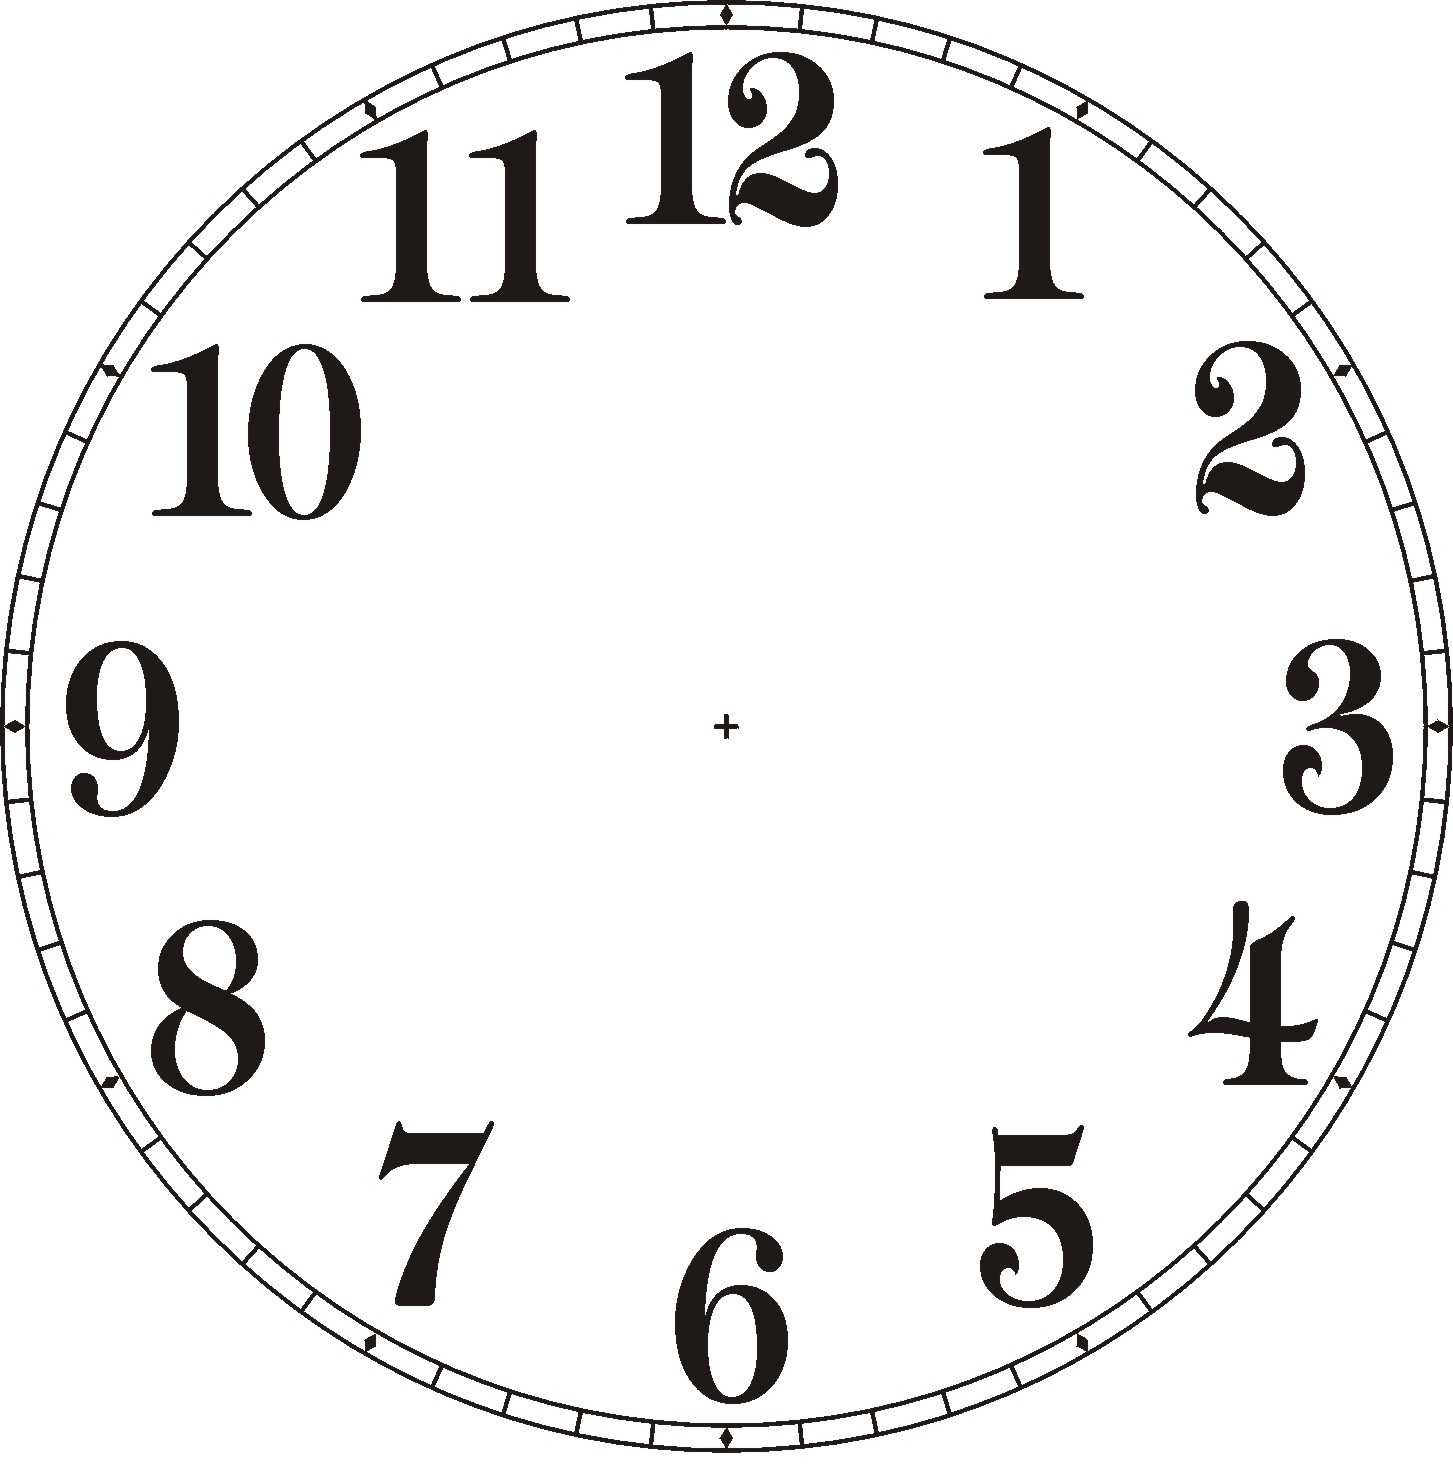 Clocks Clipart With No Hands - ClipArt Best